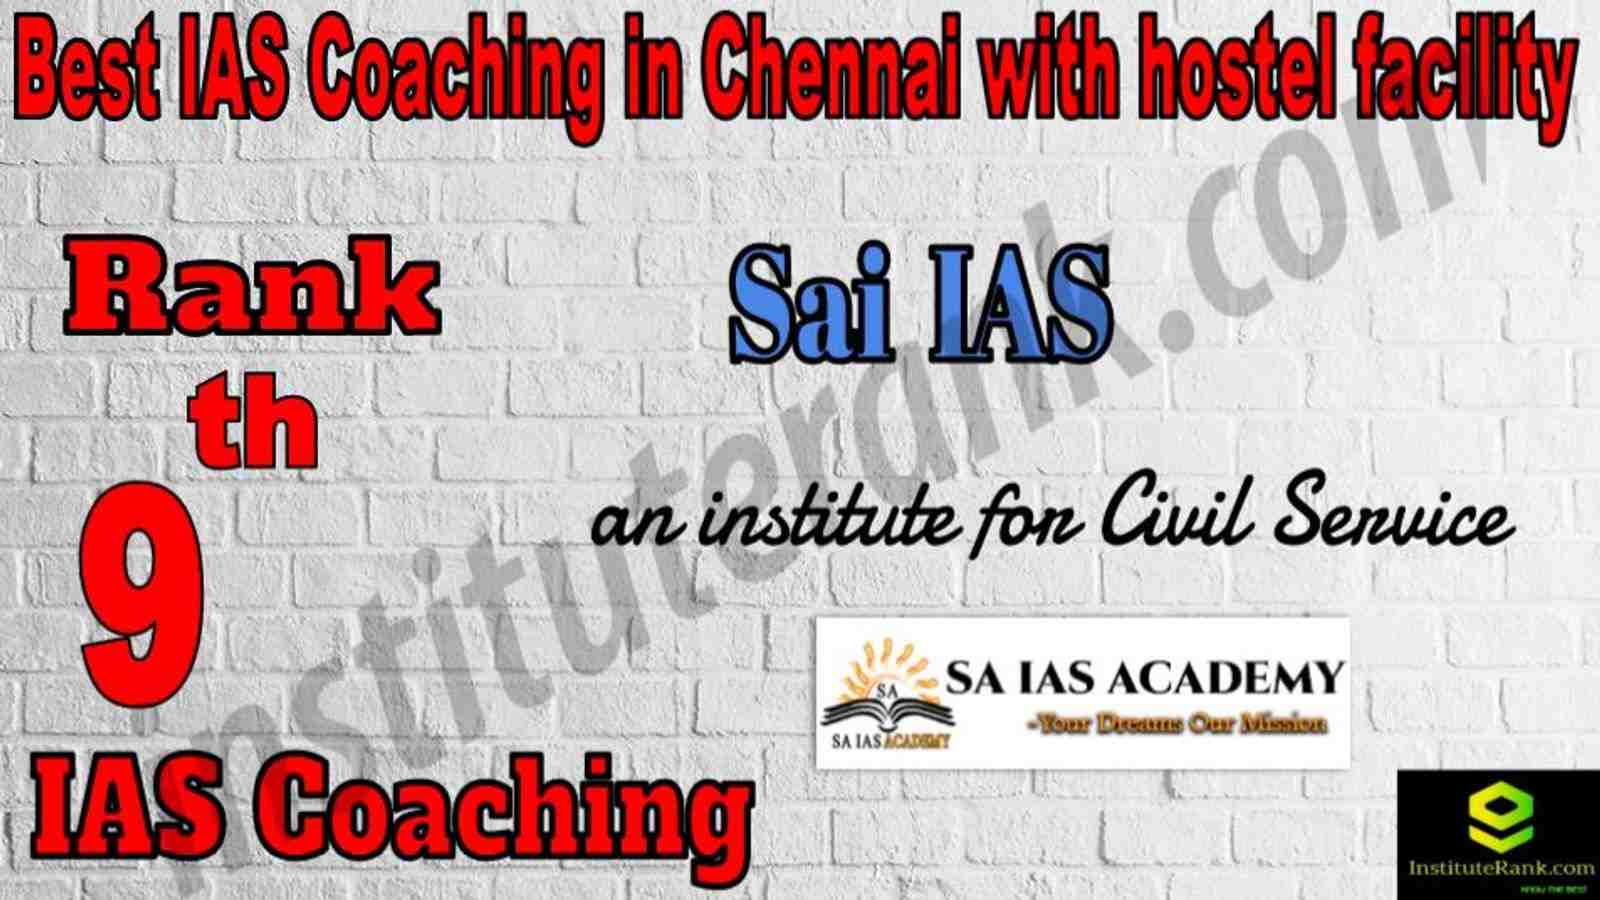 9th Best IAS Coaching in Chennai with hostel facility